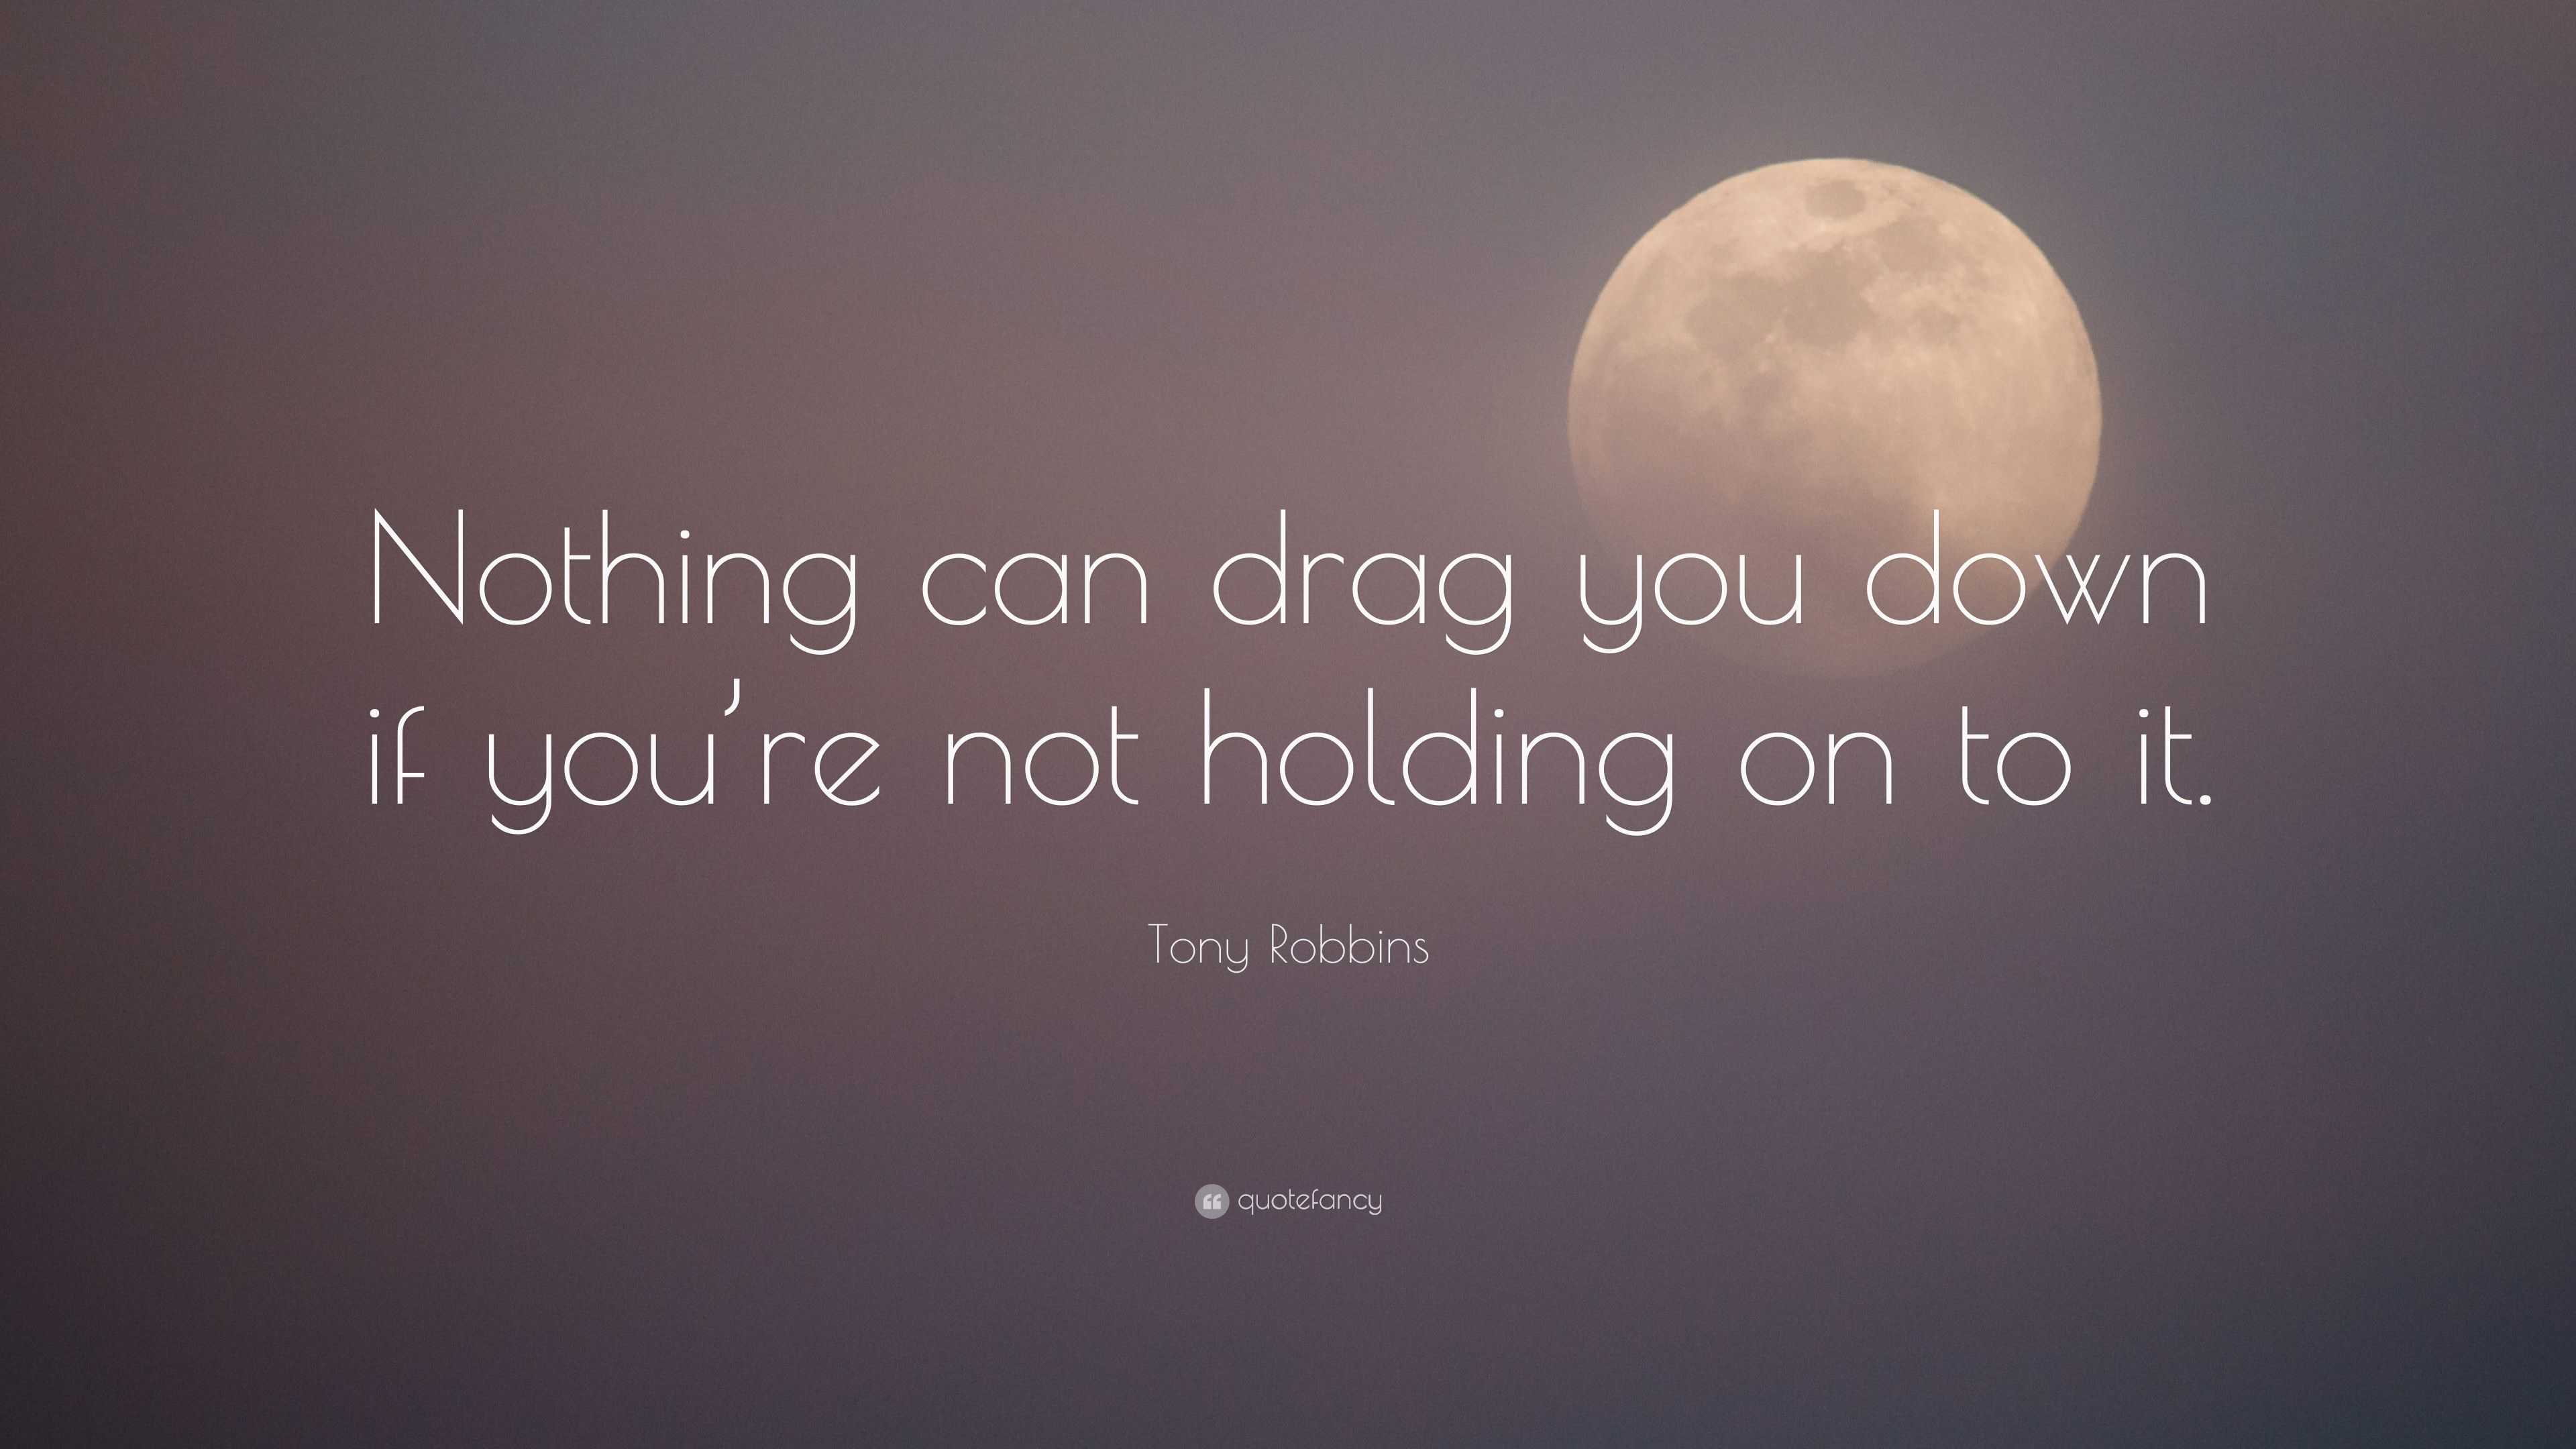 Tony Robbins Quote: “Nothing can drag you down if you’re not holding on ...